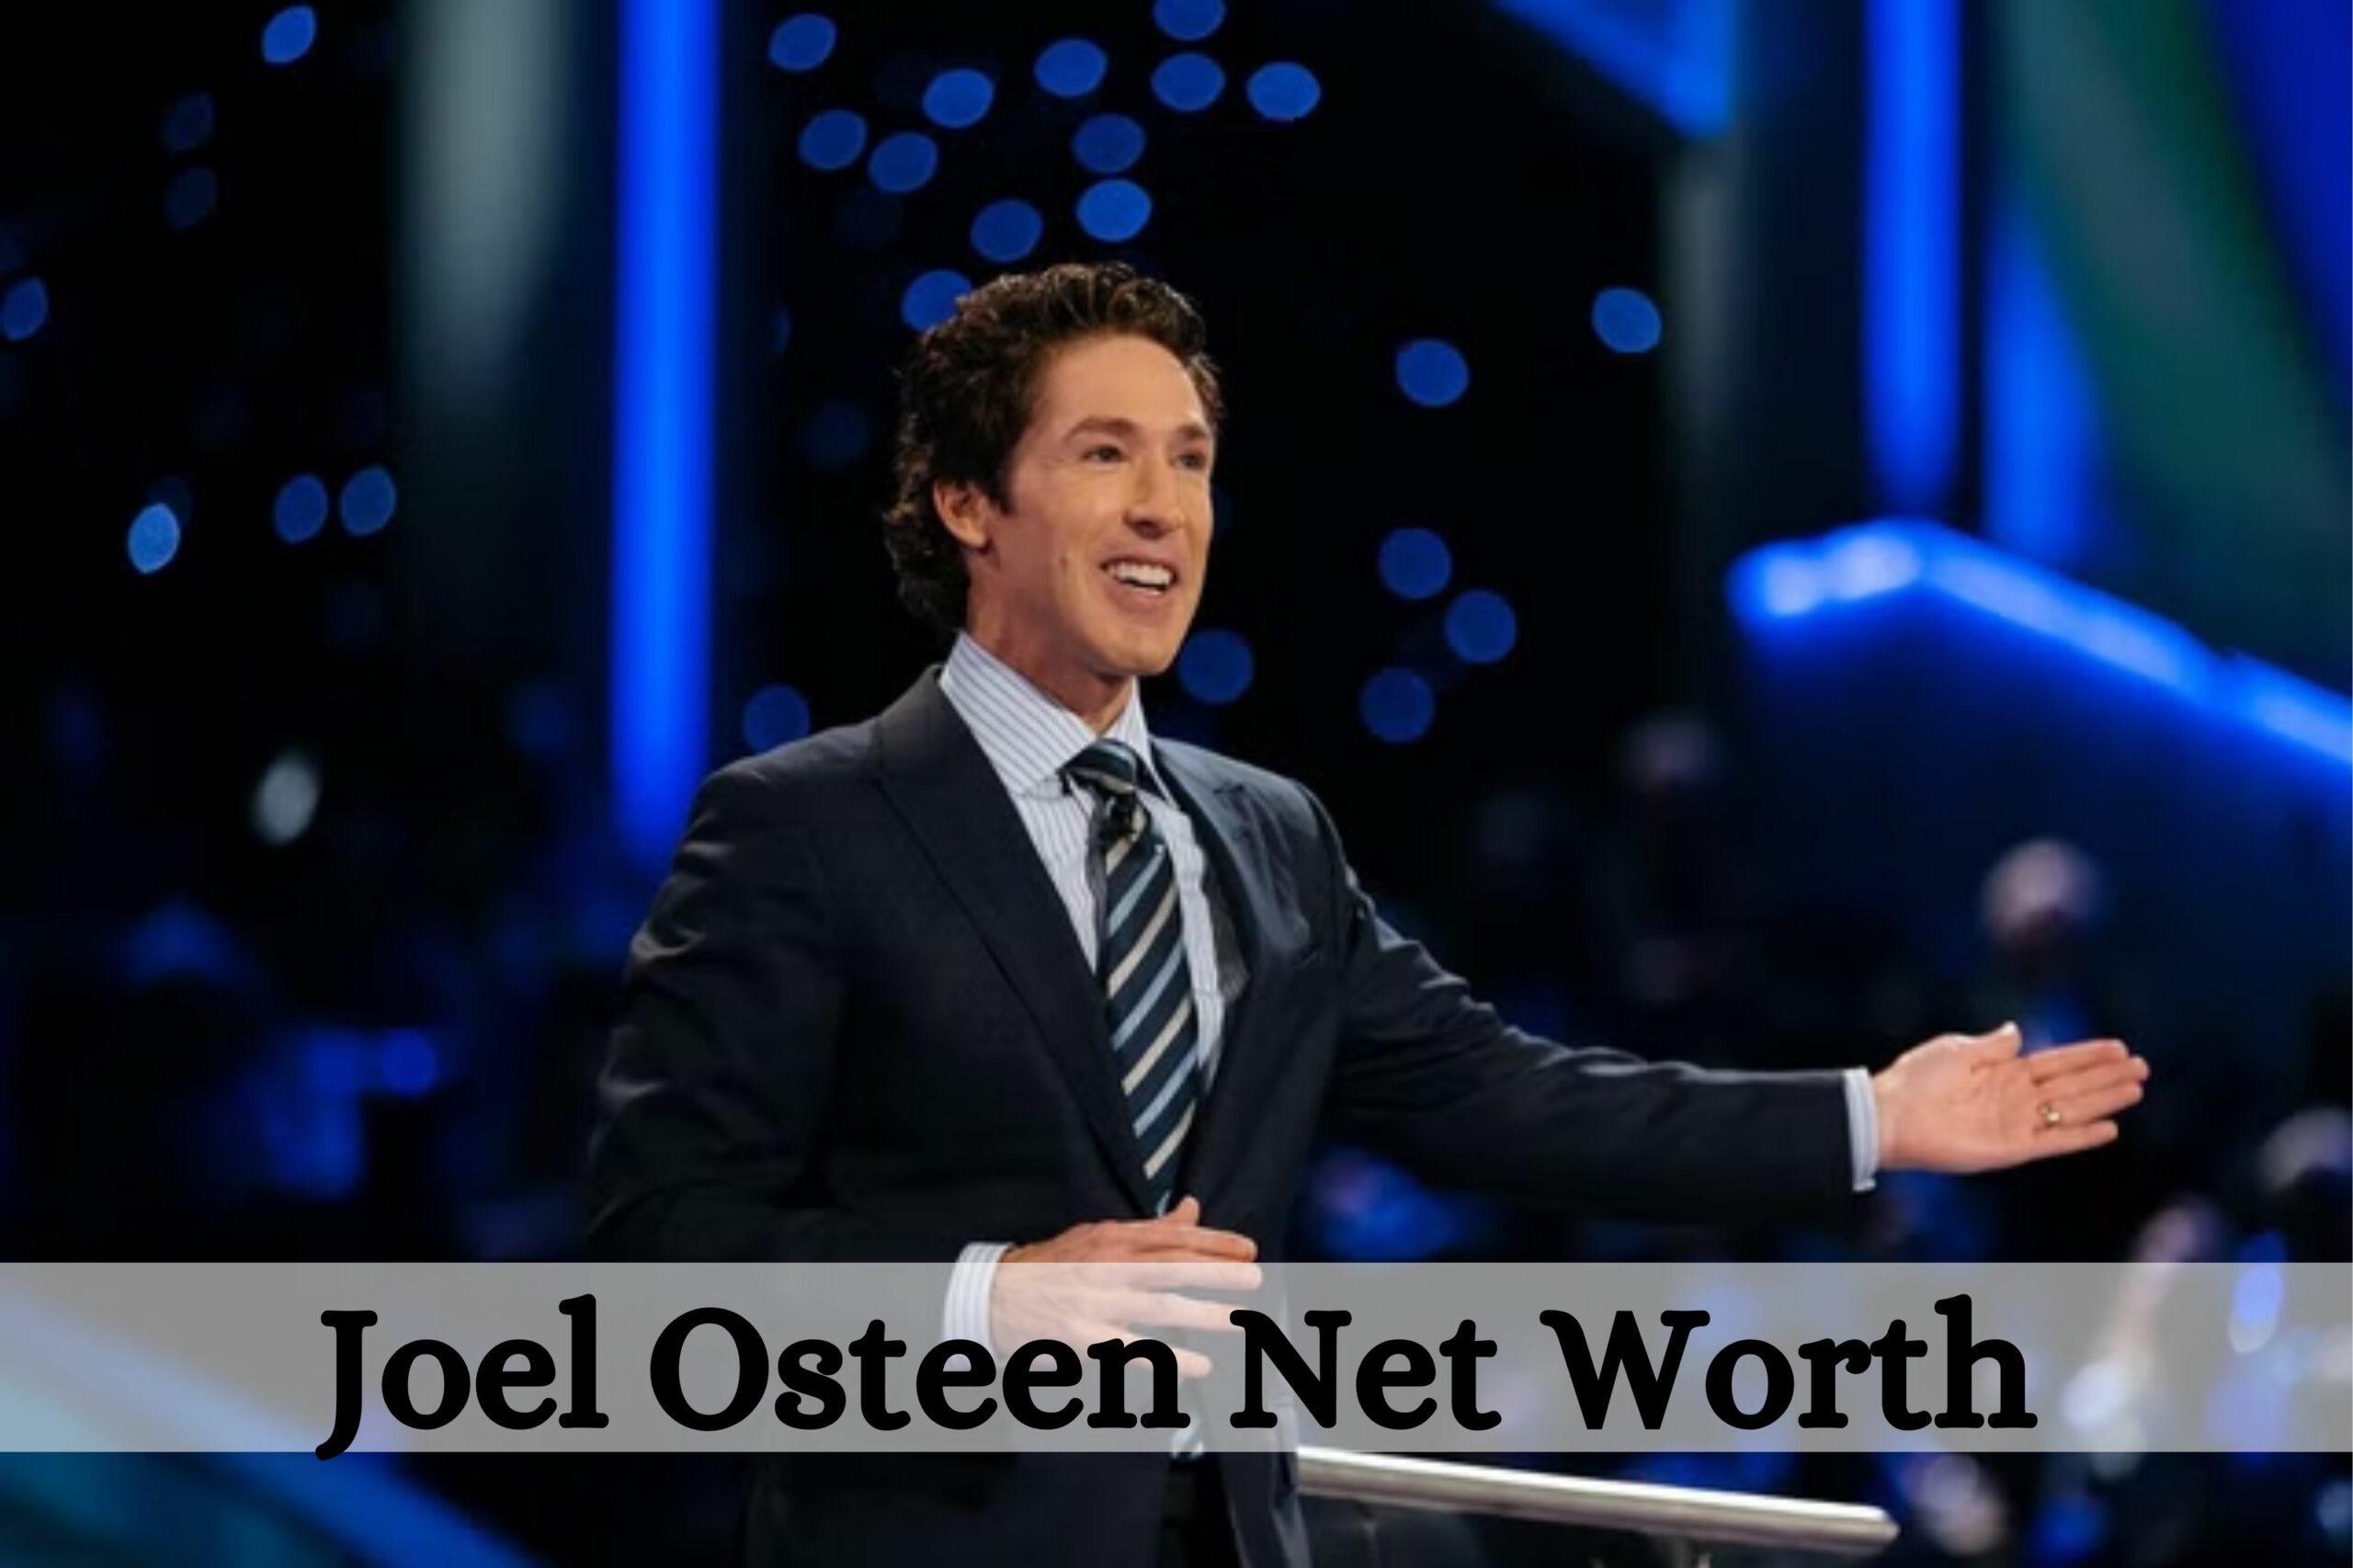 Joel Osteen Net worth, Career, And Why He's Being Criticized! Check 2022 Updates!